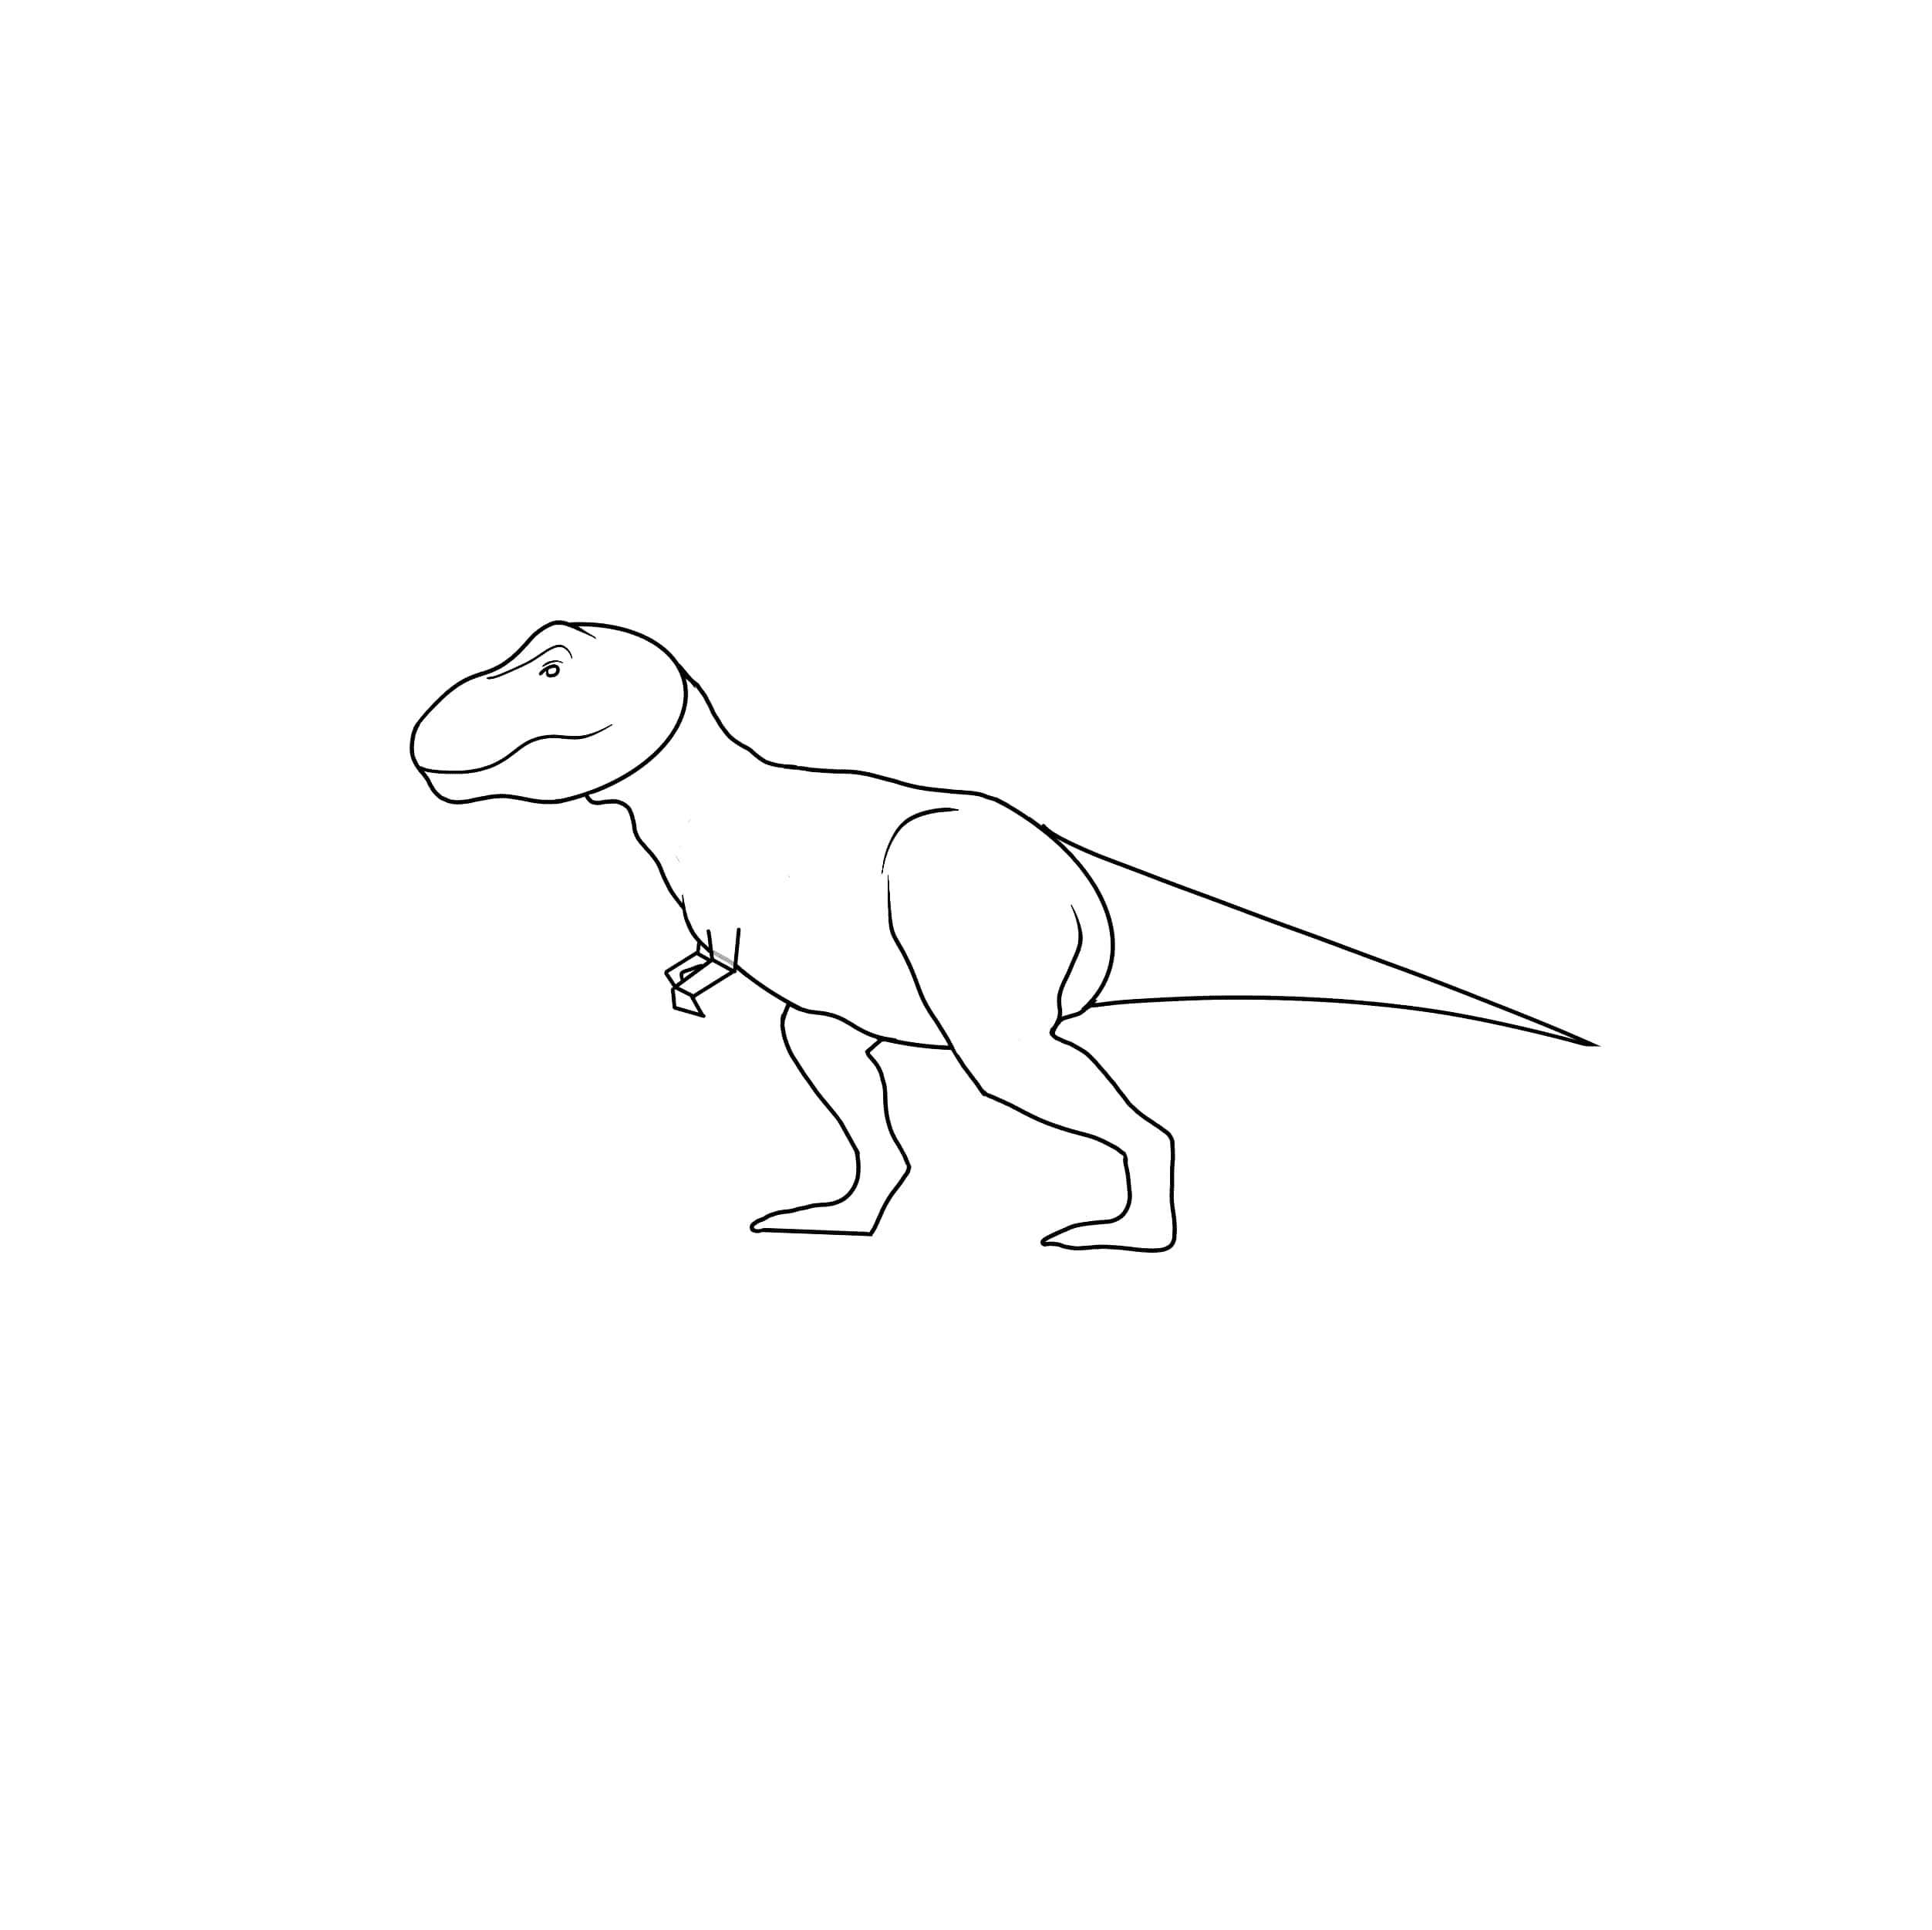 how to draw a realistic dinosaur step 3 draw new lines for dinosaur hands eyes and mouth